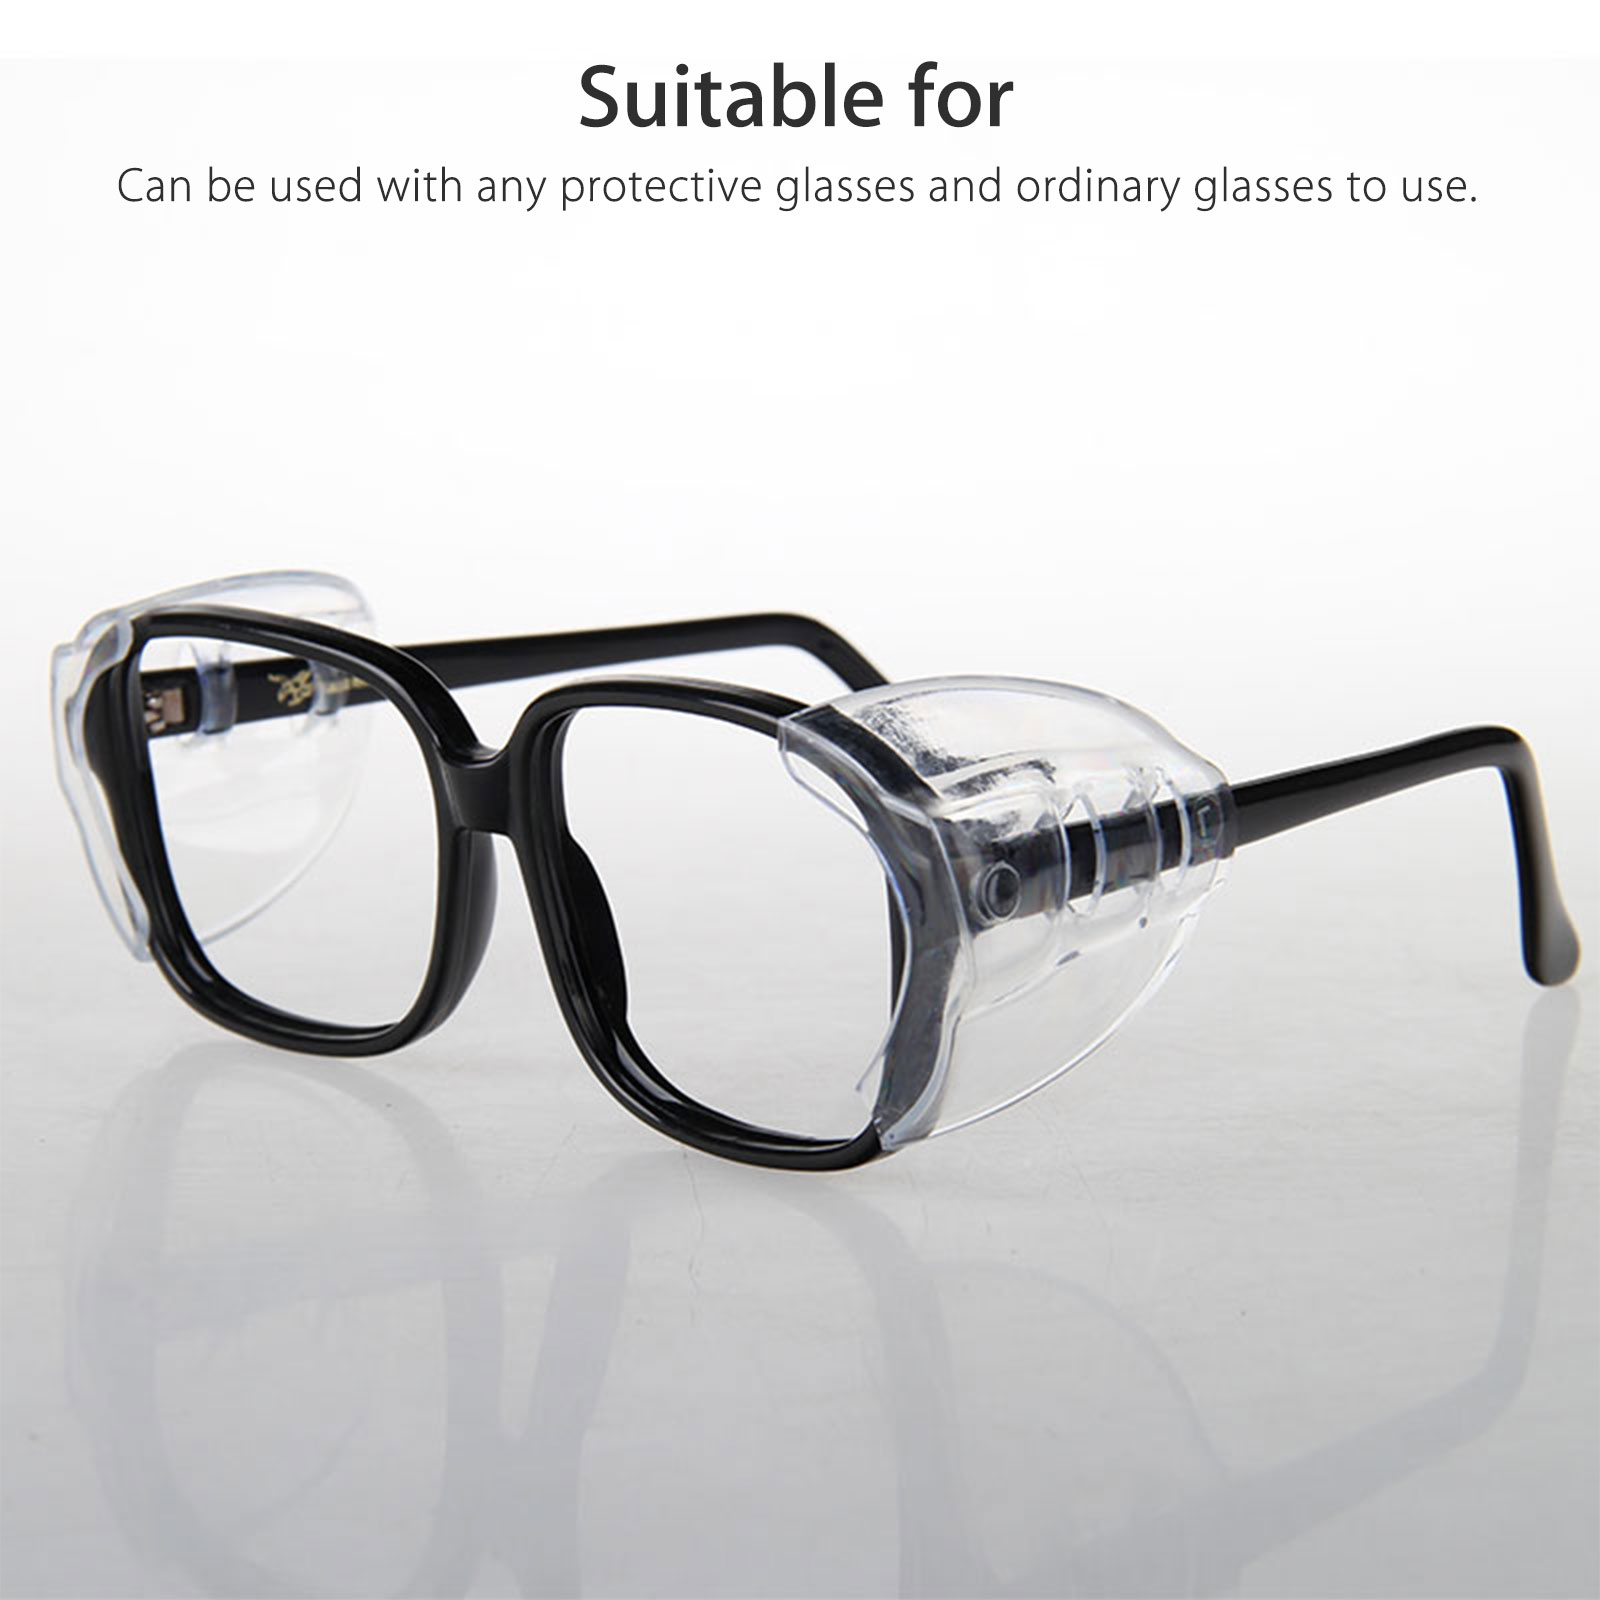 Clear Universal Flexible Protective Side Shields For Eye Glasses Safety 1 2 Pair Ebay